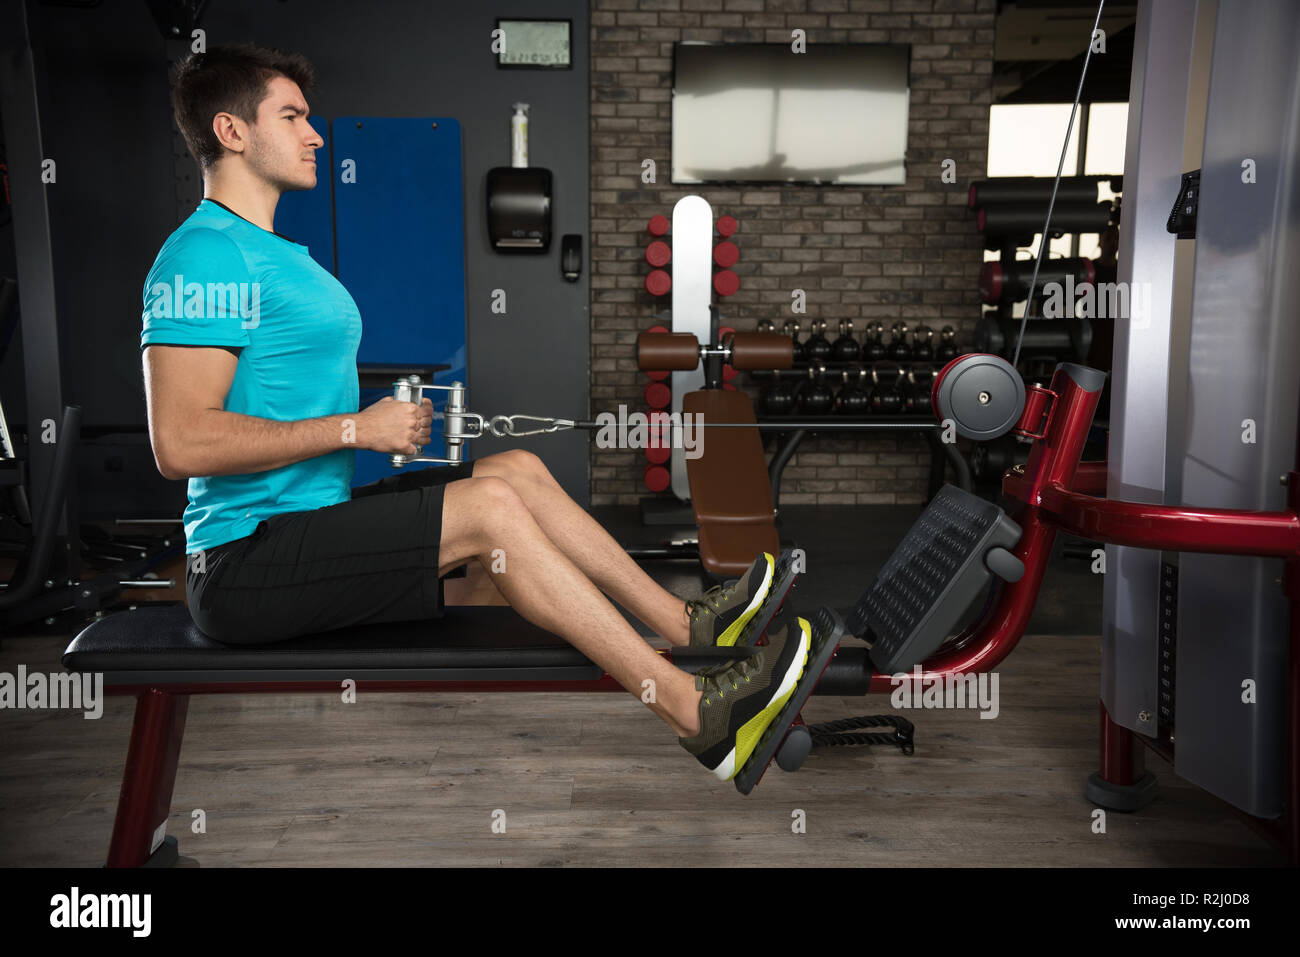 Man using a rowing machine in a gym Stock Photo